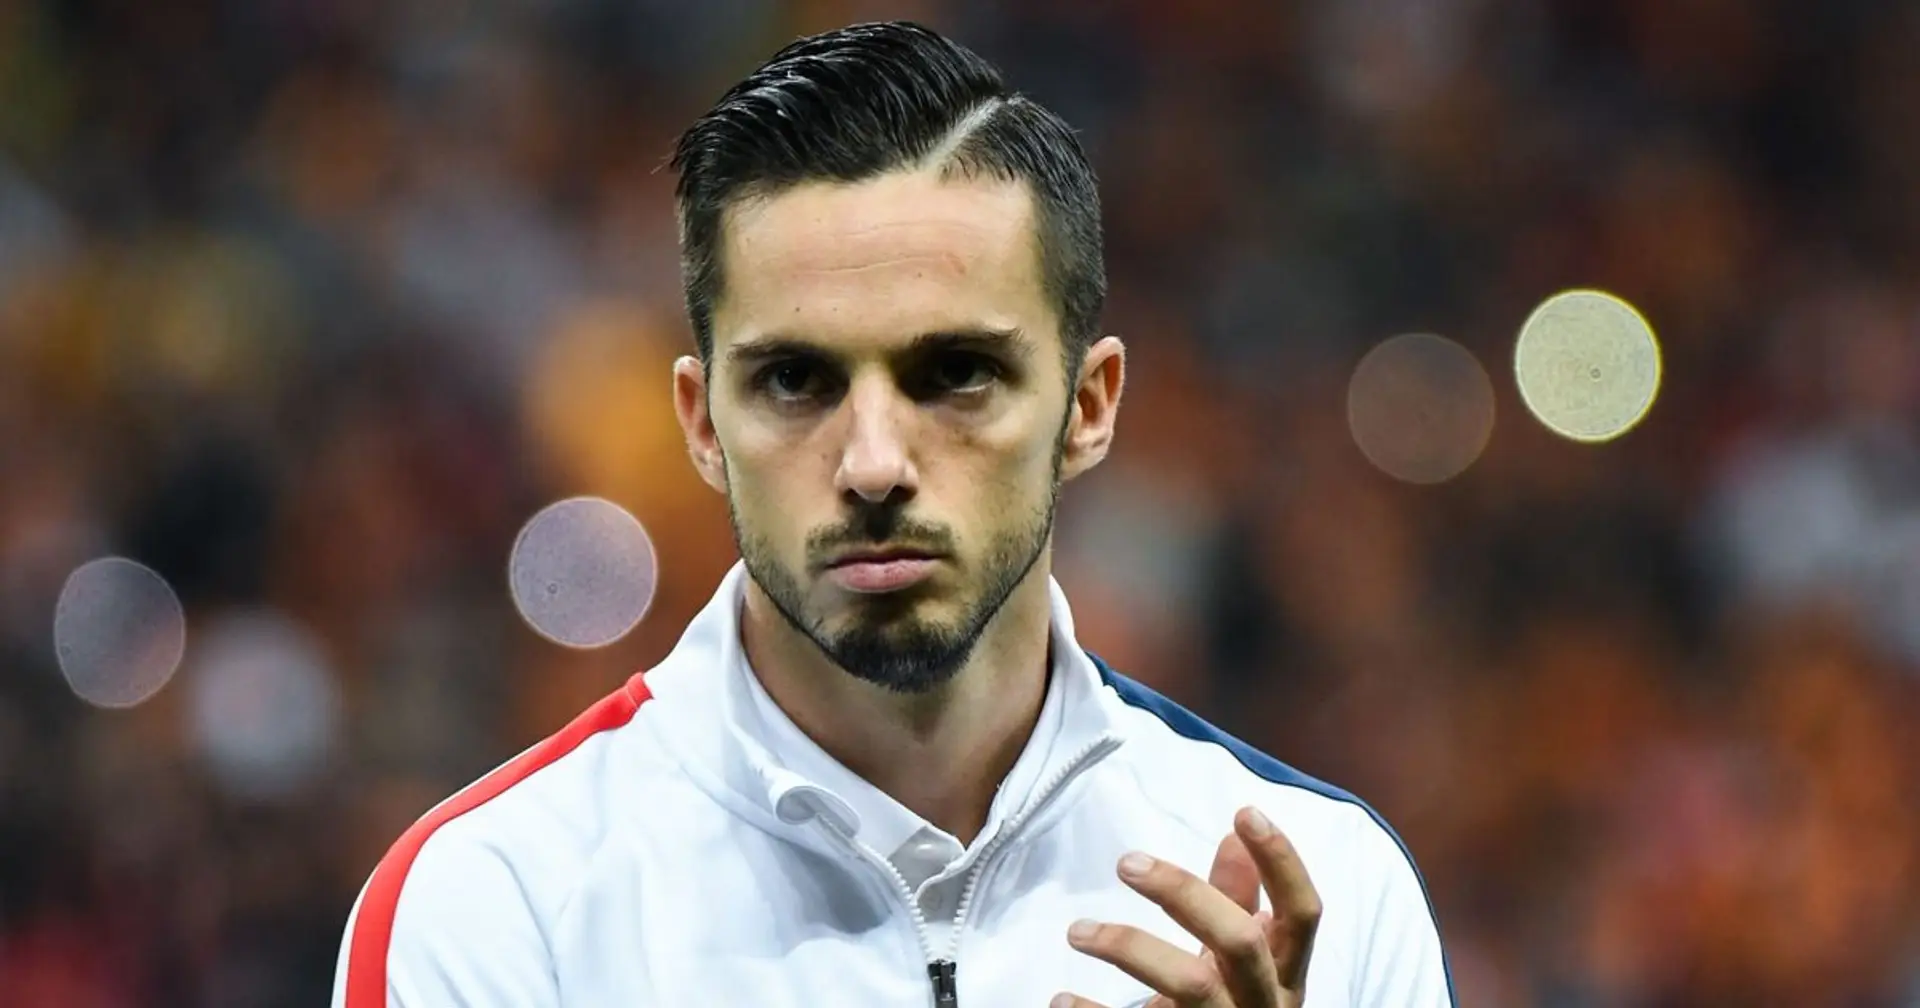 PSG want to sell Sarabia this summer, 2 clubs interested (reliability: 4 stars)